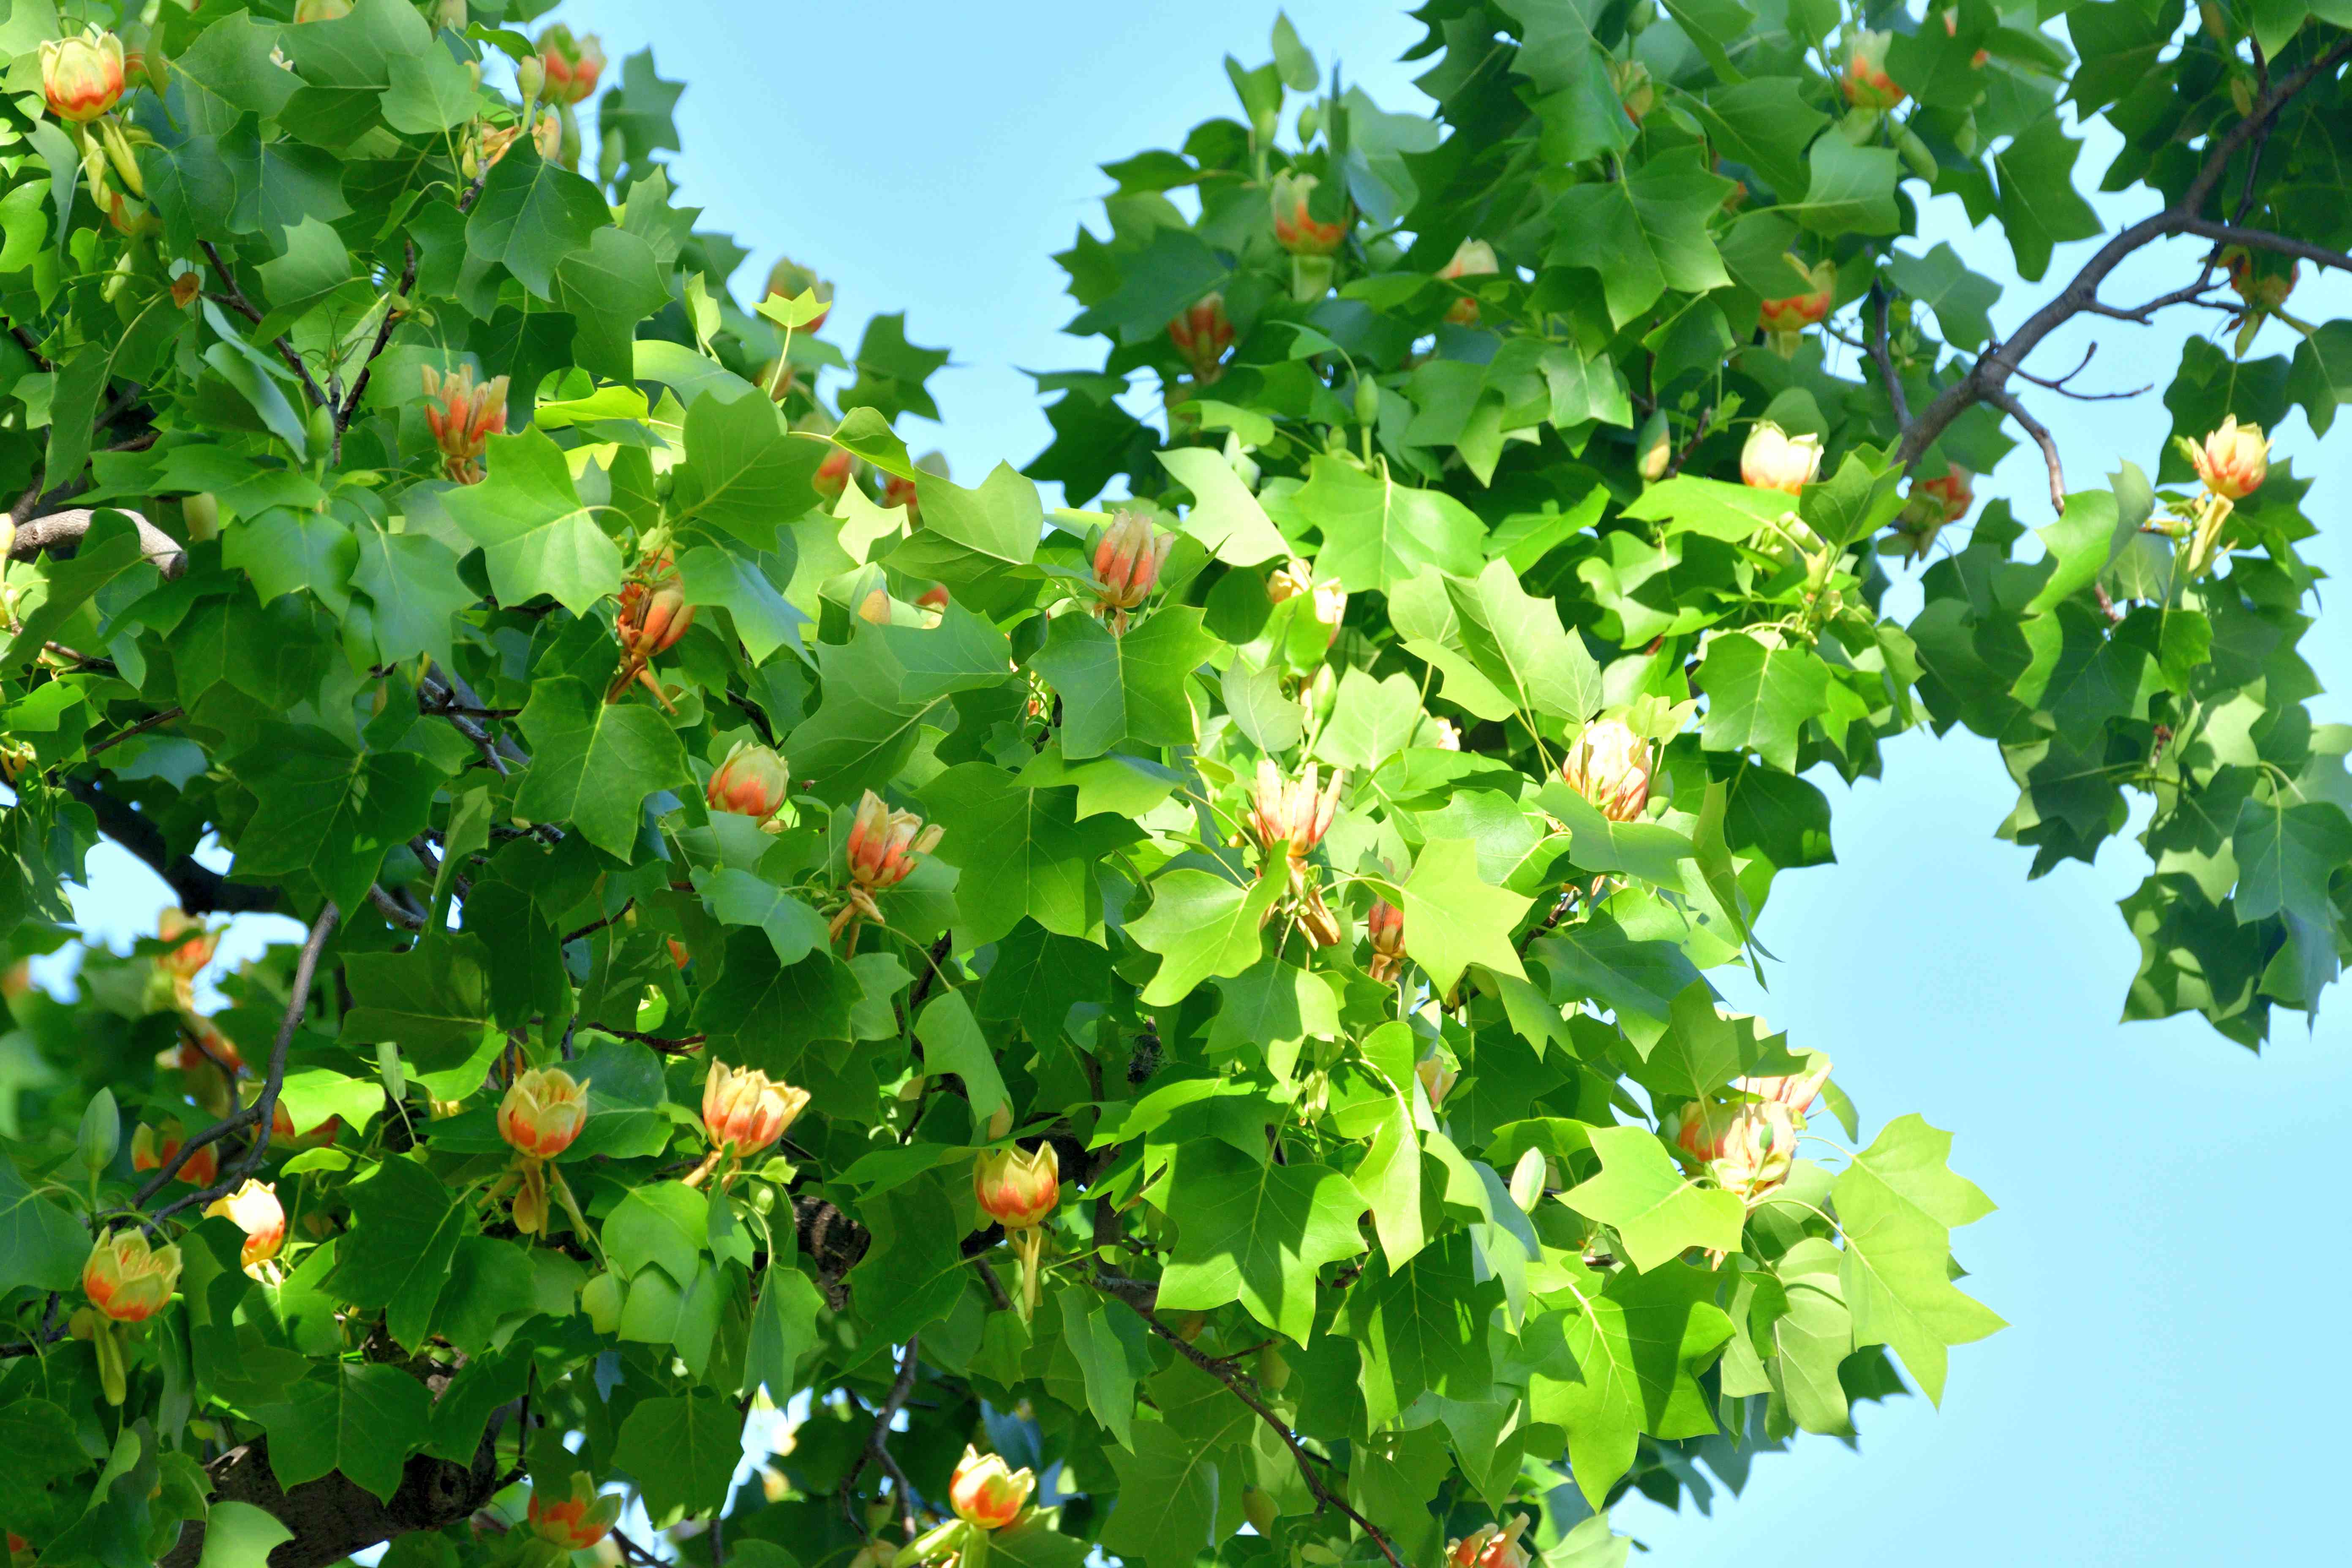 16 Fast-Growing Shade Trees to Help You Keep Your Cool Outdoors